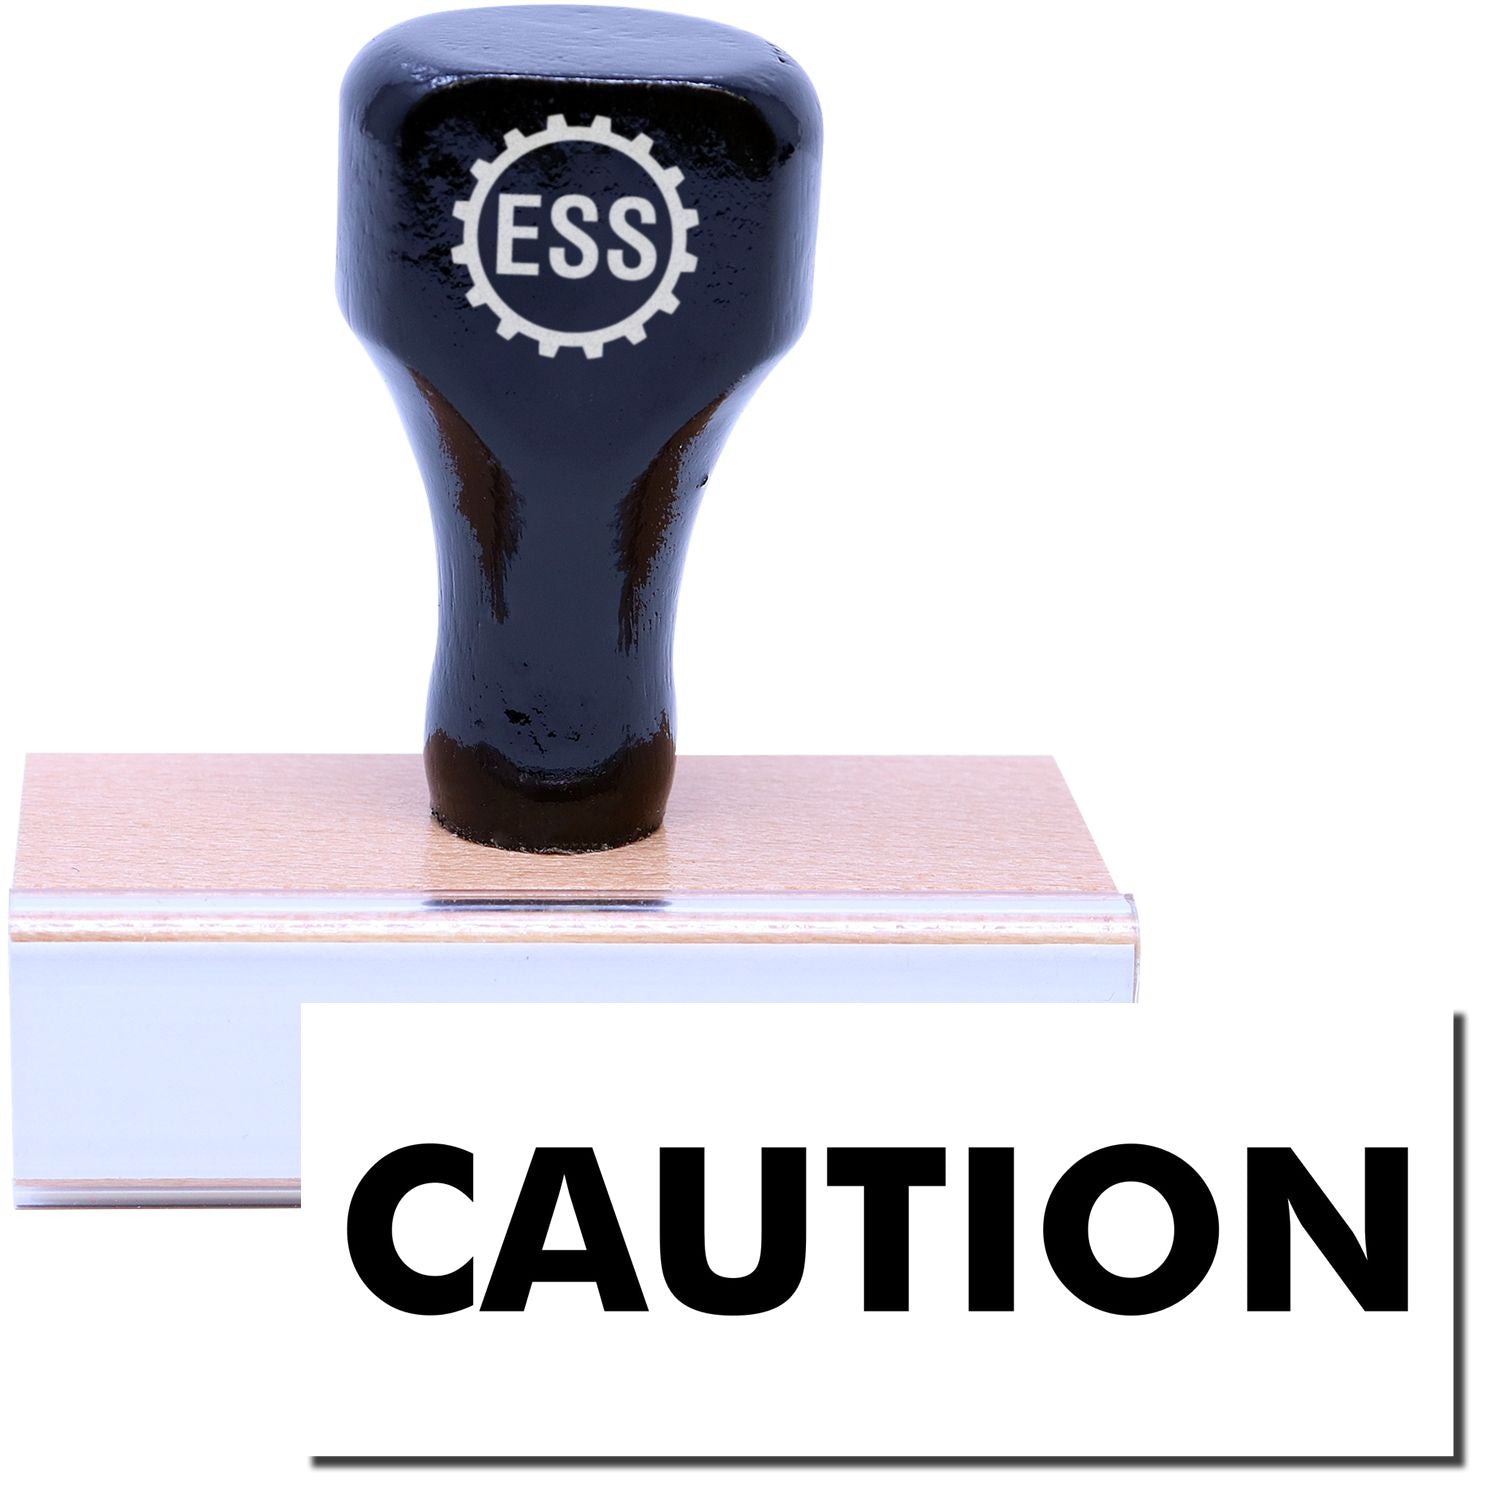 A stock office rubber stamp with a stamped image showing how the text "CAUTION" is displayed after stamping.